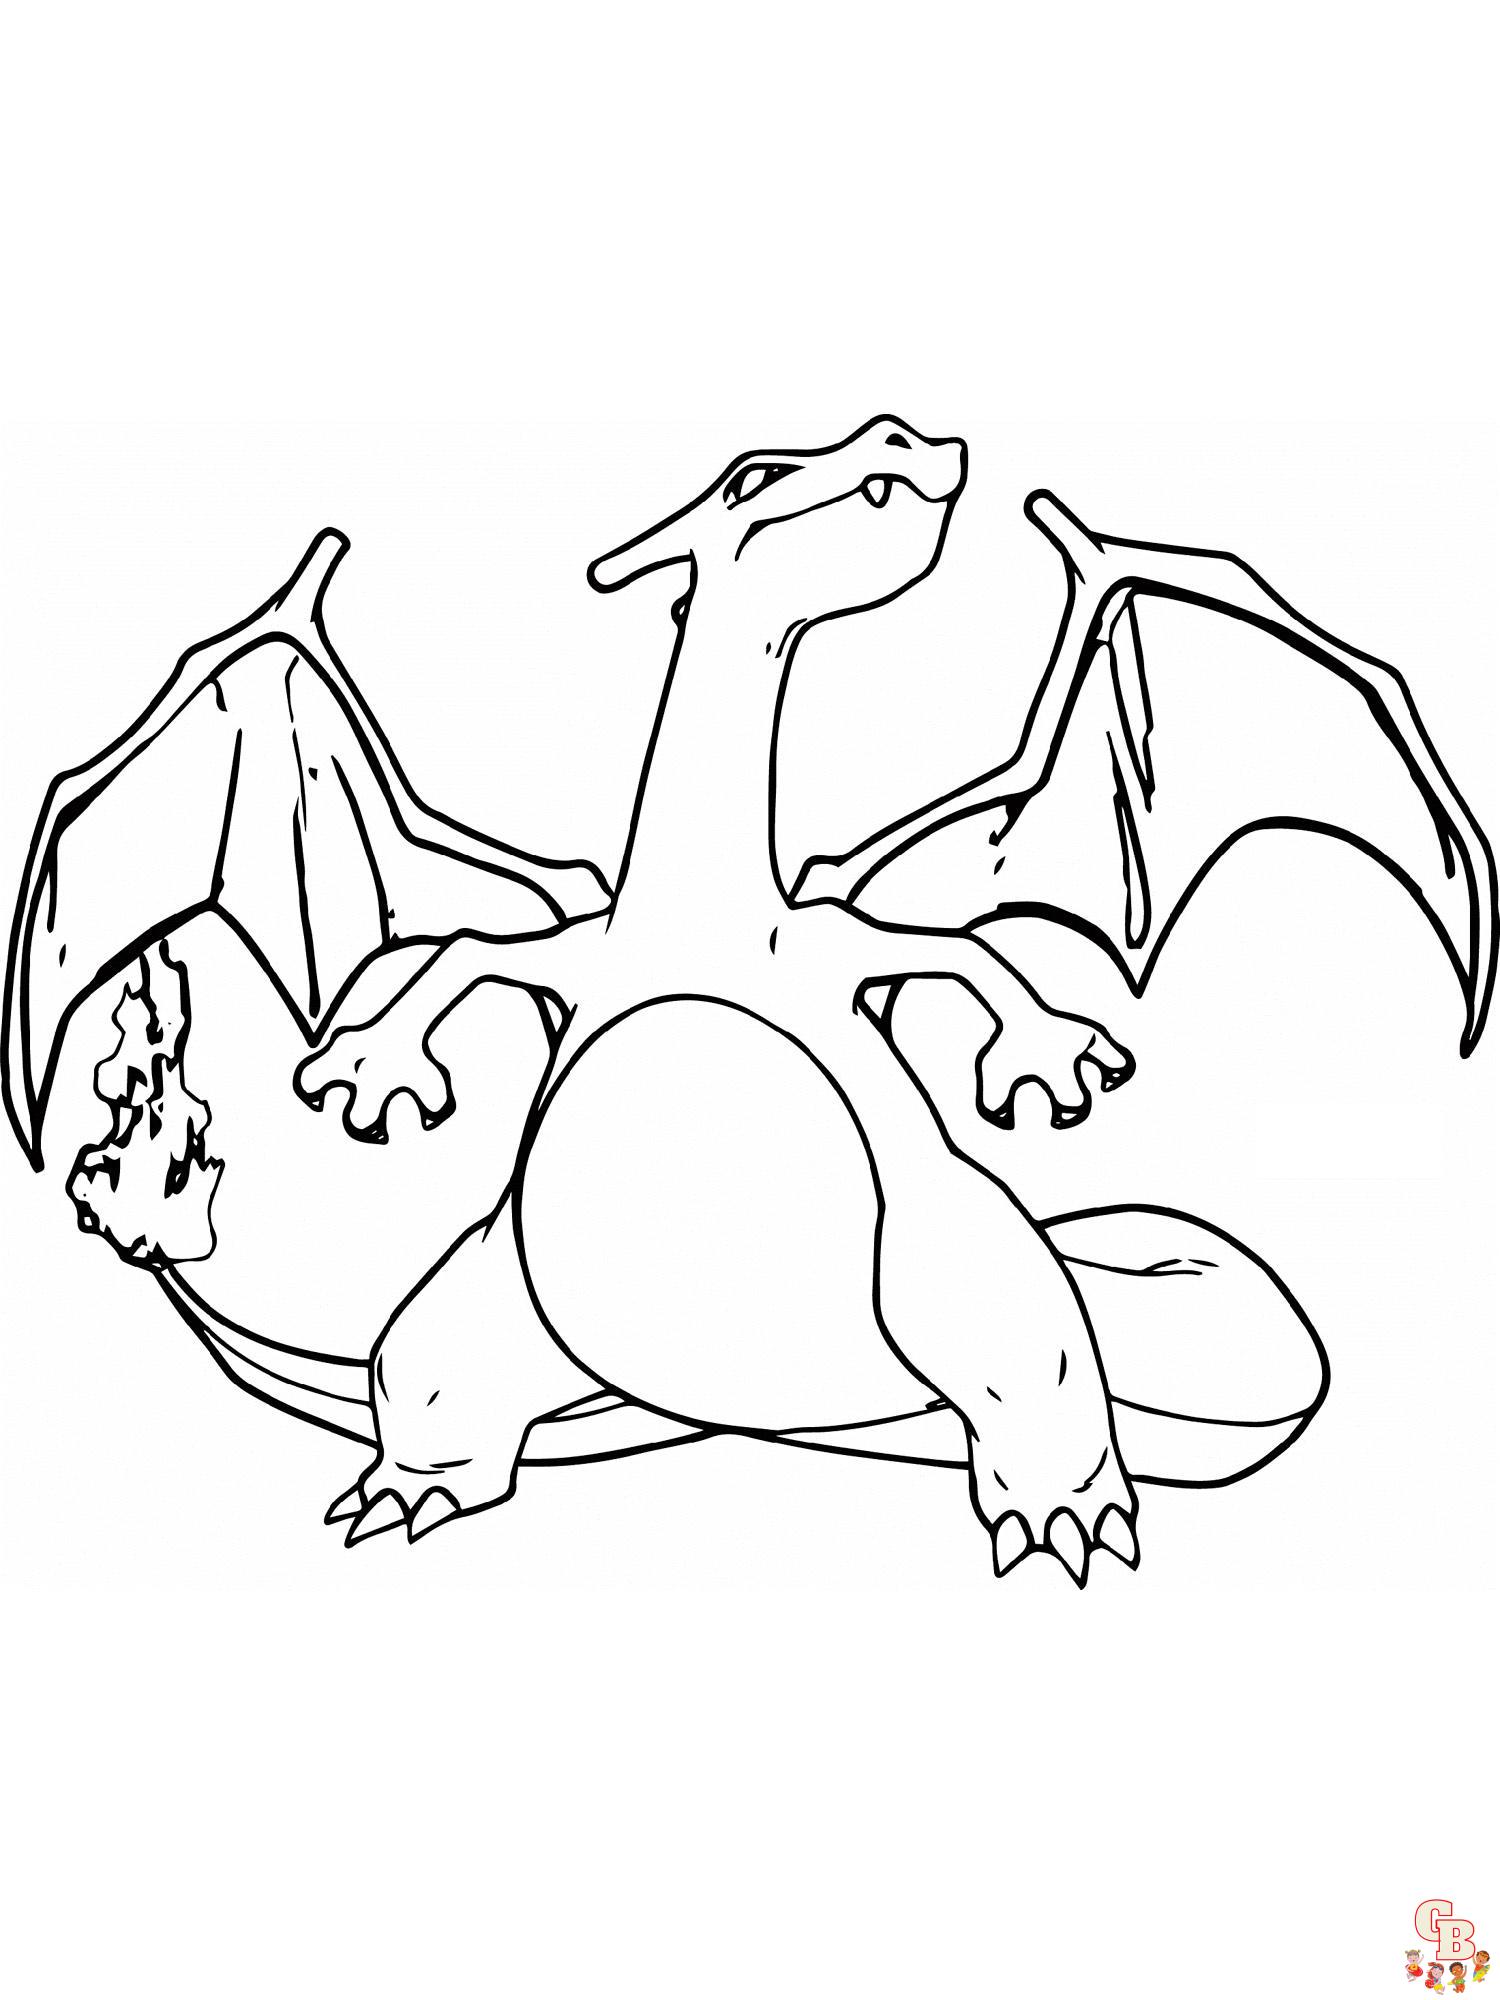 Charizard Coloring Pages